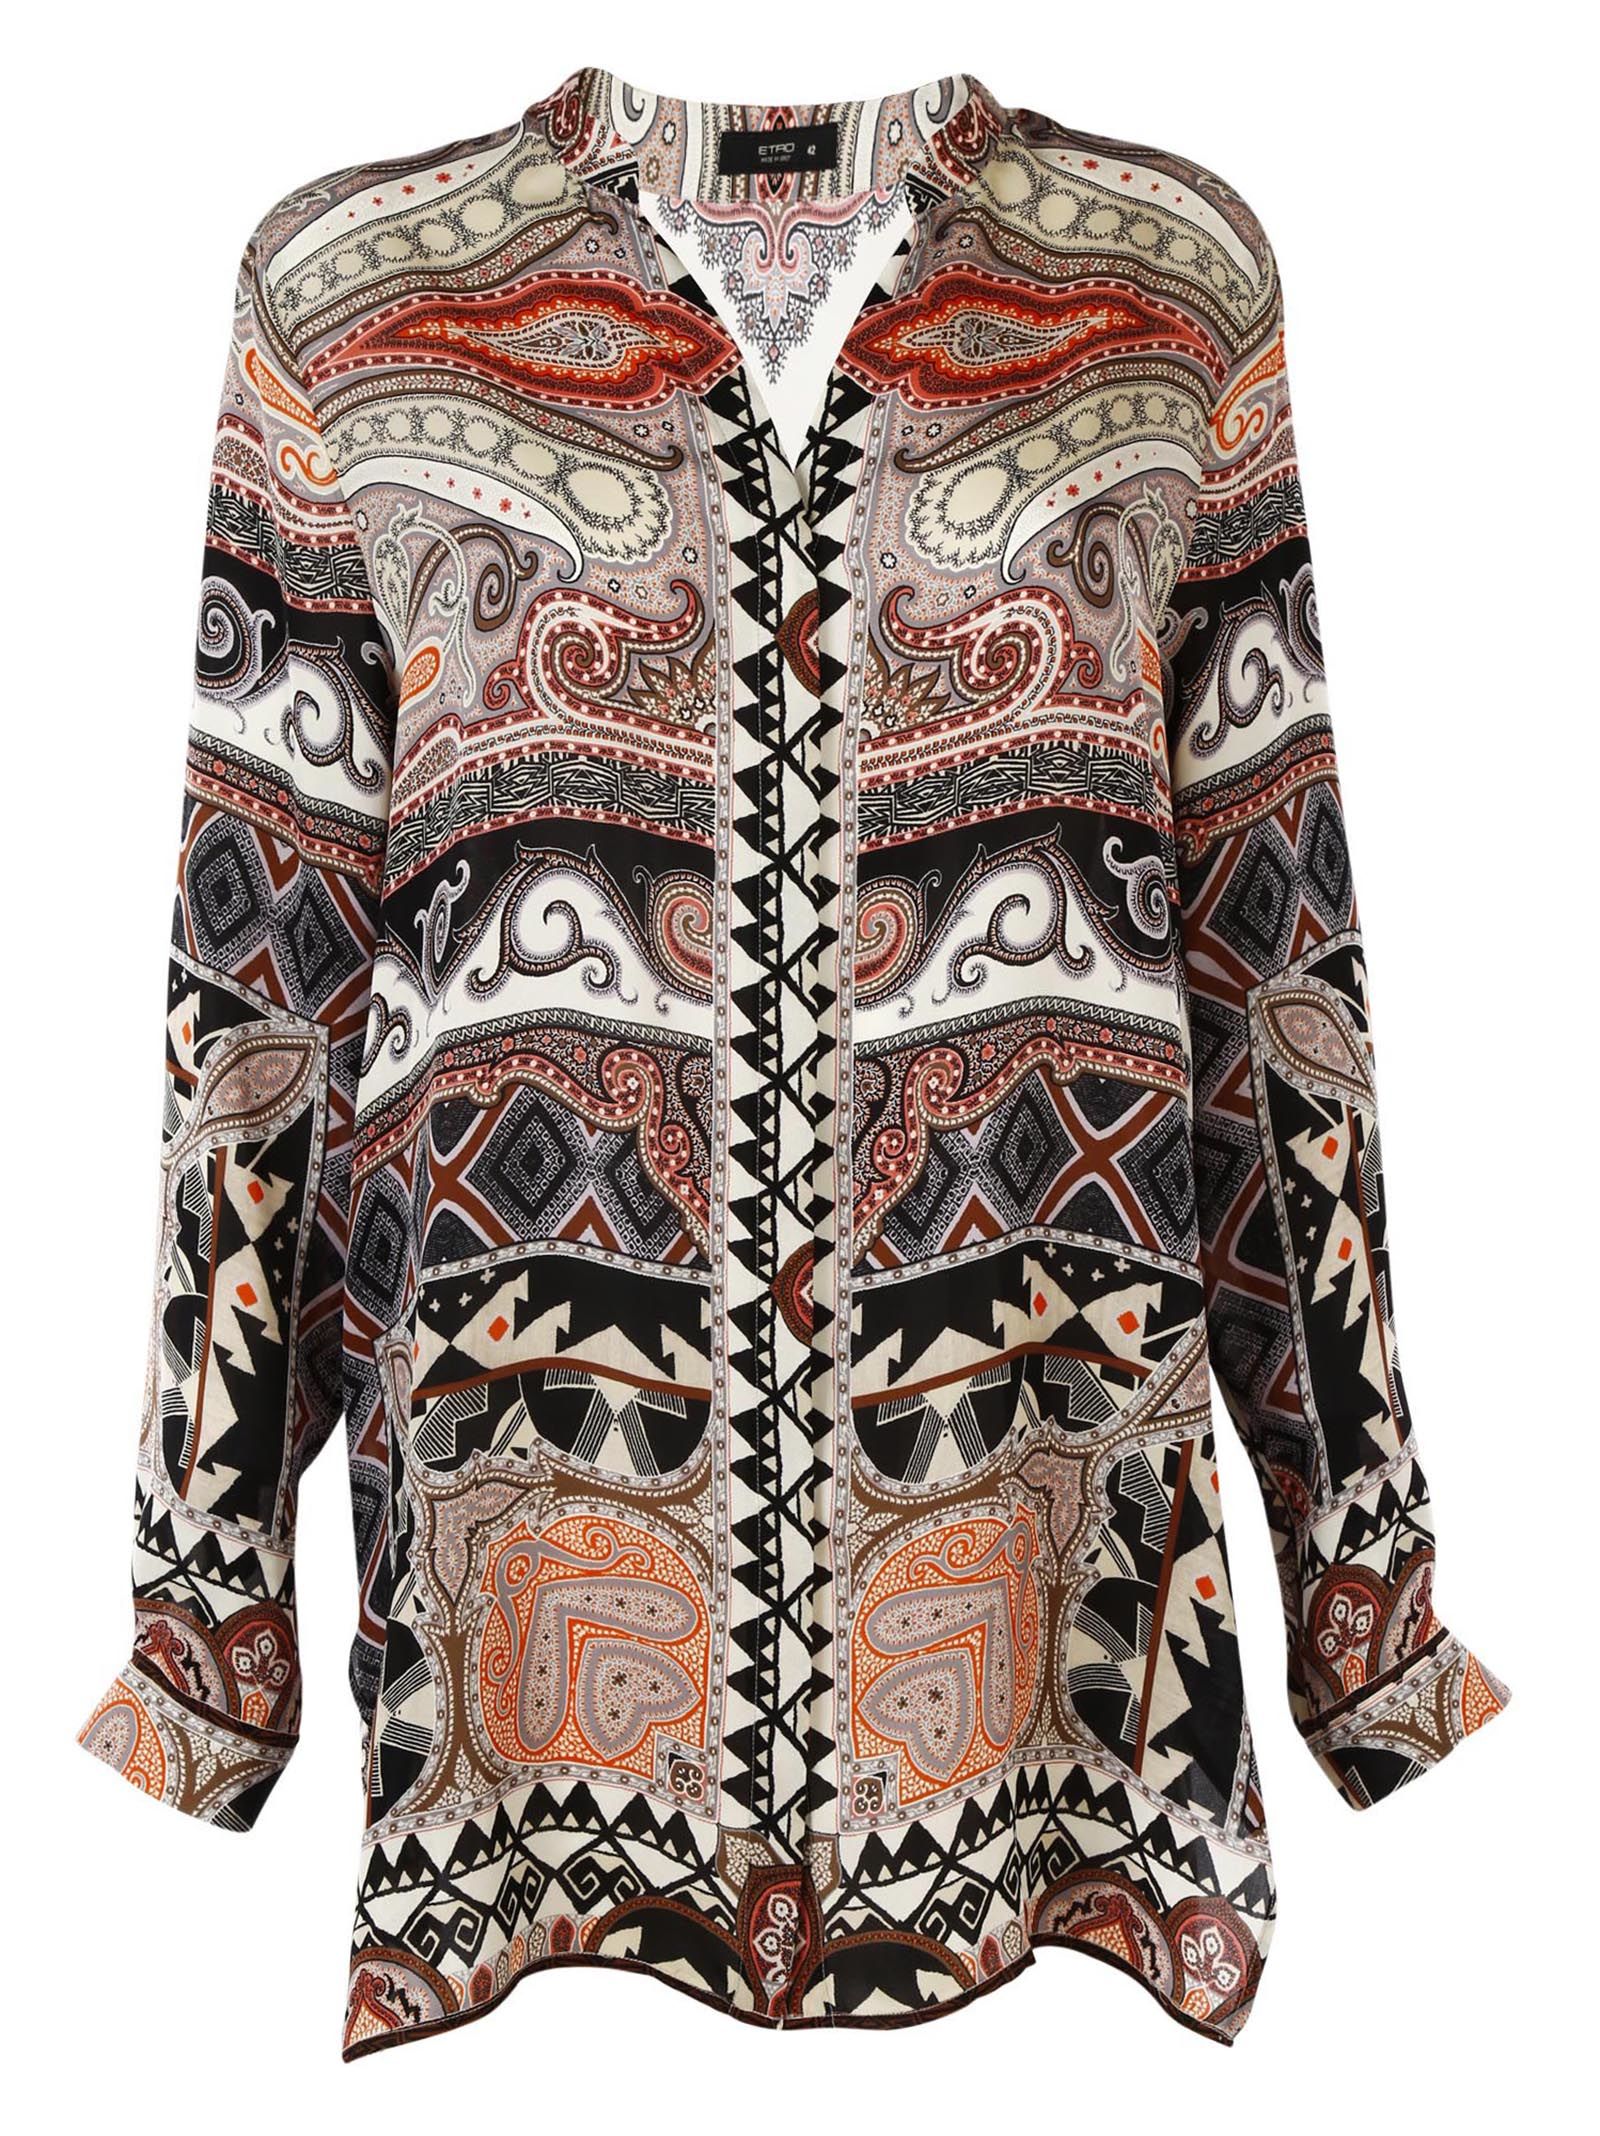 italist | Best price in the market for Etro Etro Paisley Print Shirt ...